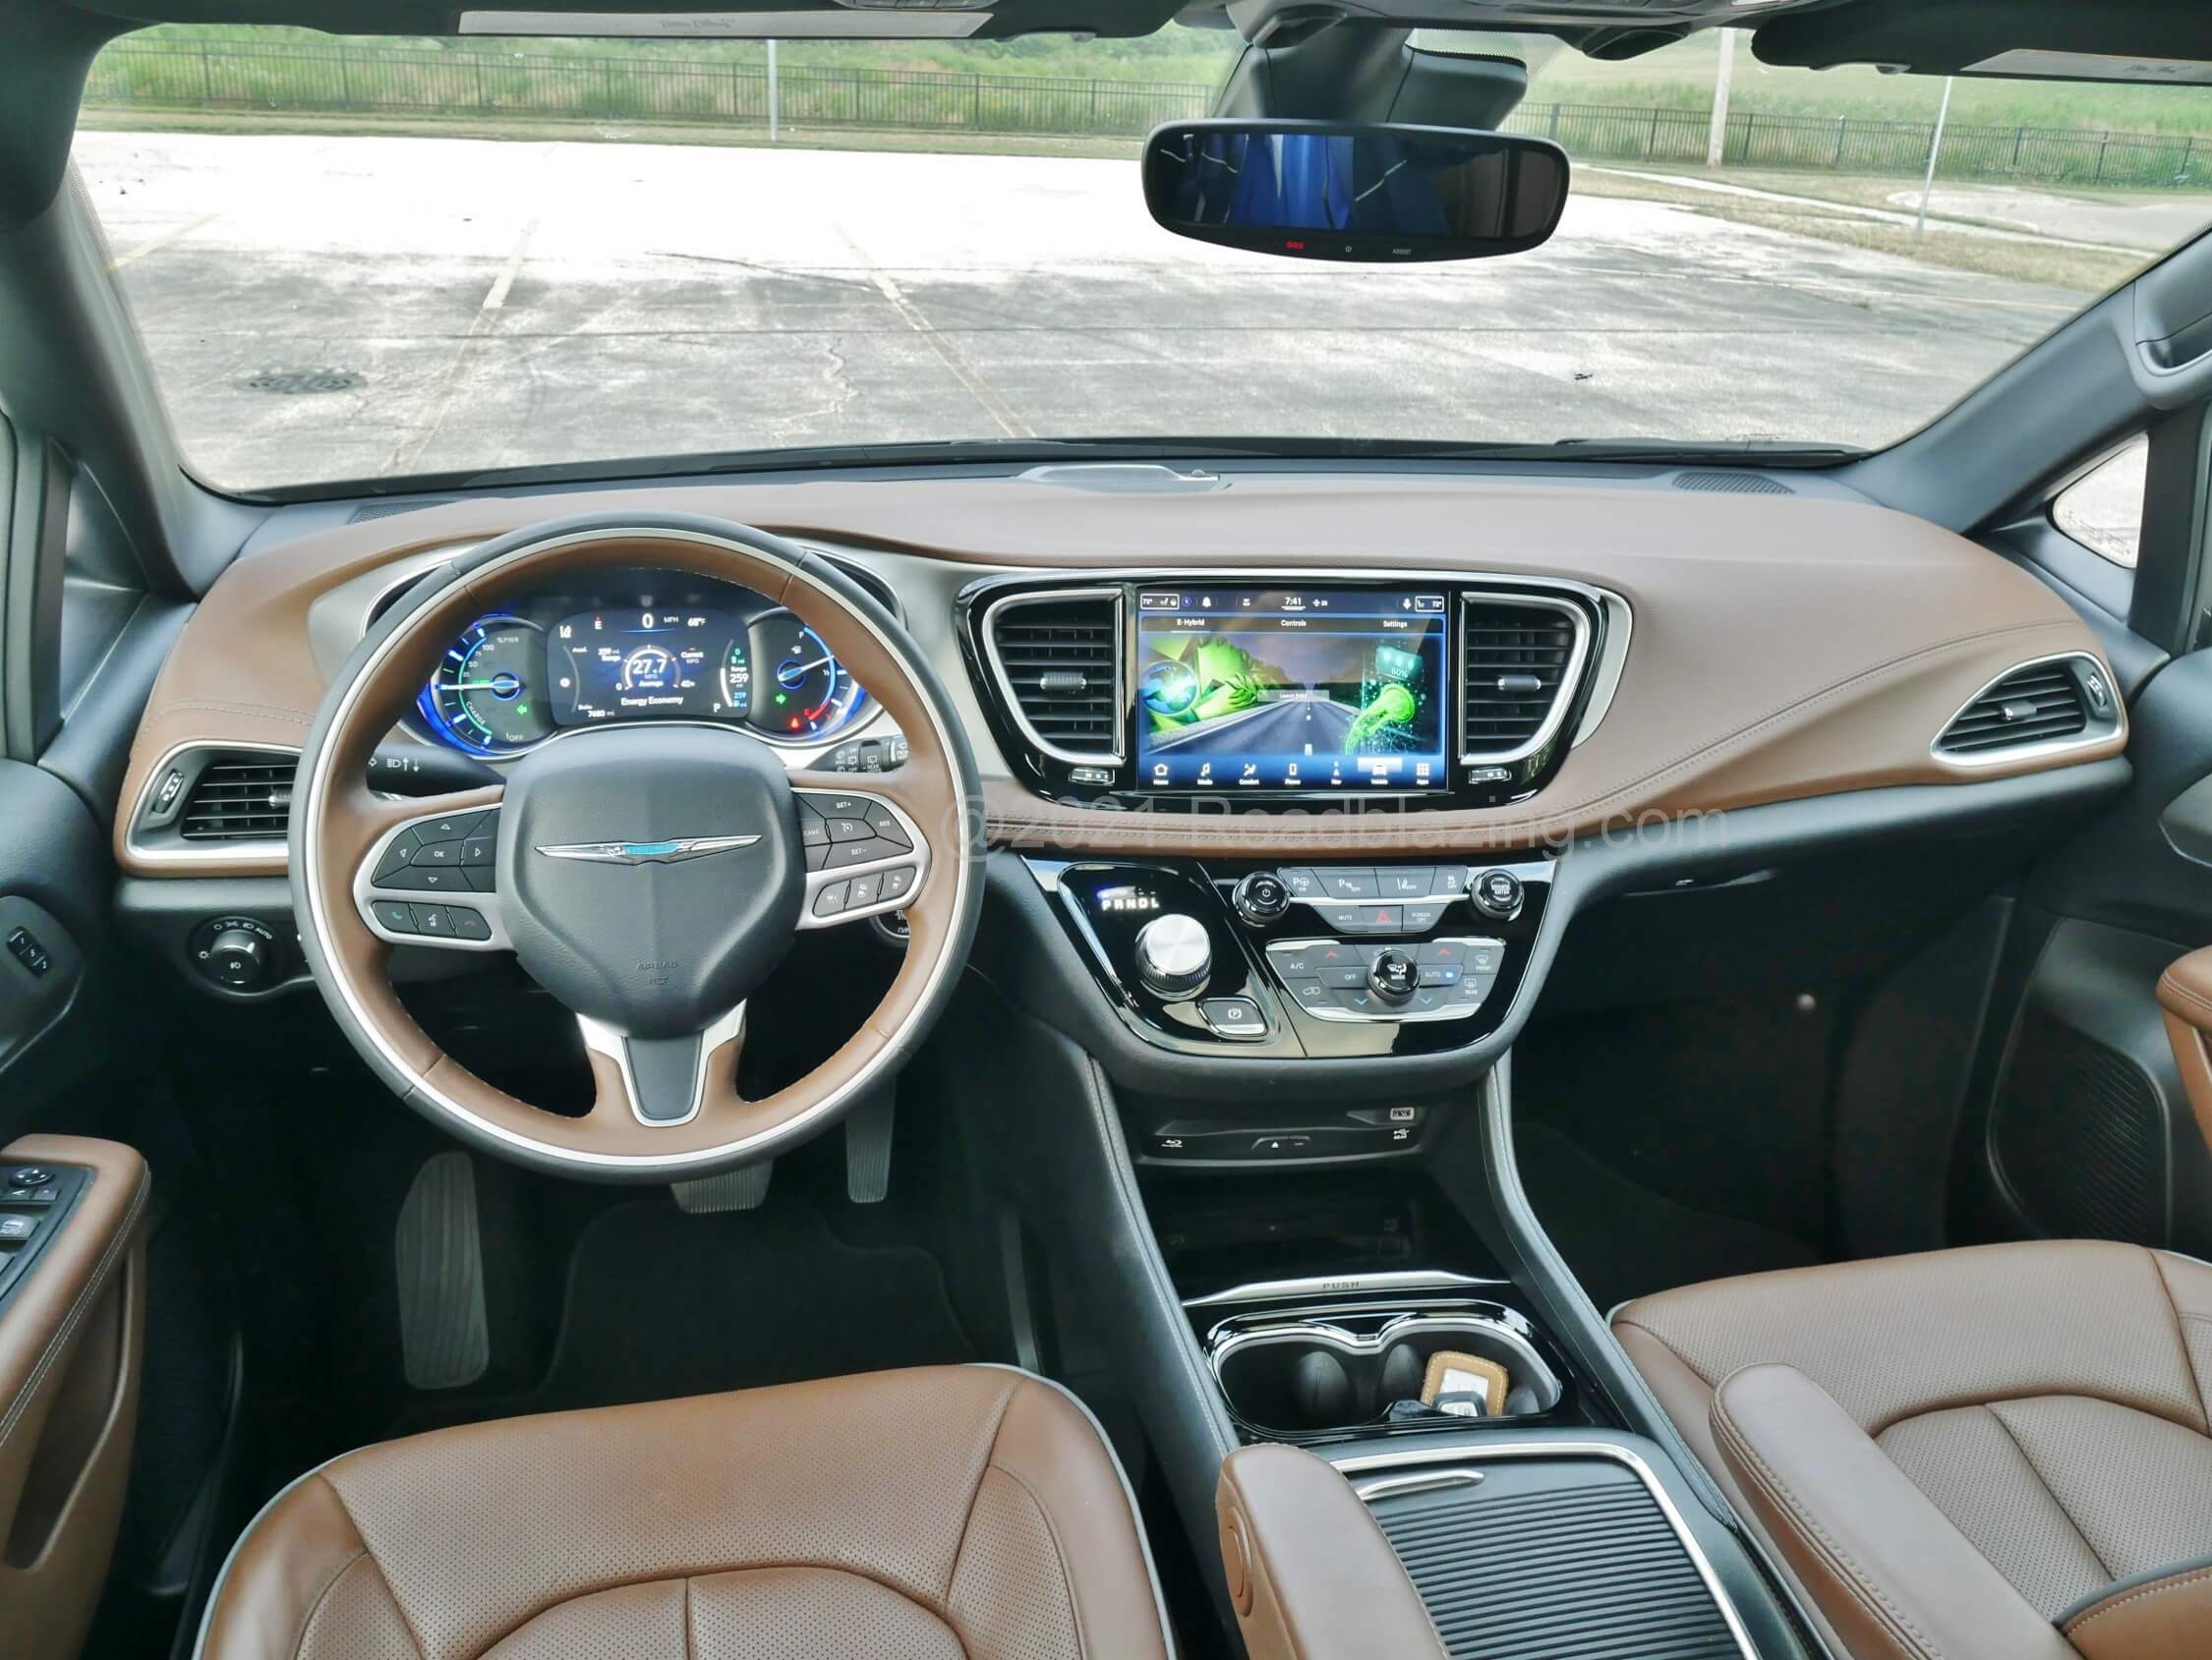 2021 Chrysler Pacifica Limited Hybrid PHEV: a cockpit of saddle leathers and folded seam soft panels, flat surfaces, embedded touch LCD screens